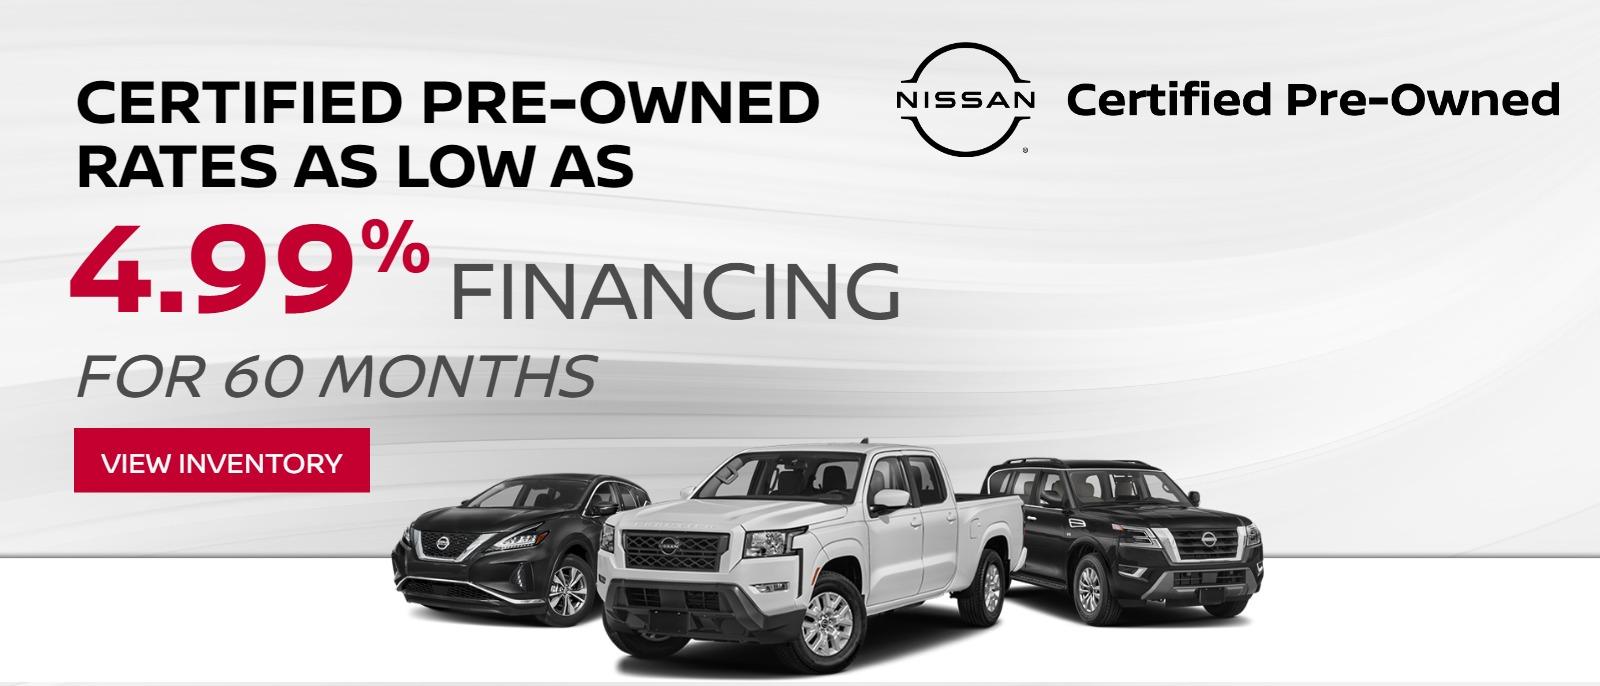 Certified Pre-owned, rates as low as 3.99% for 60 months